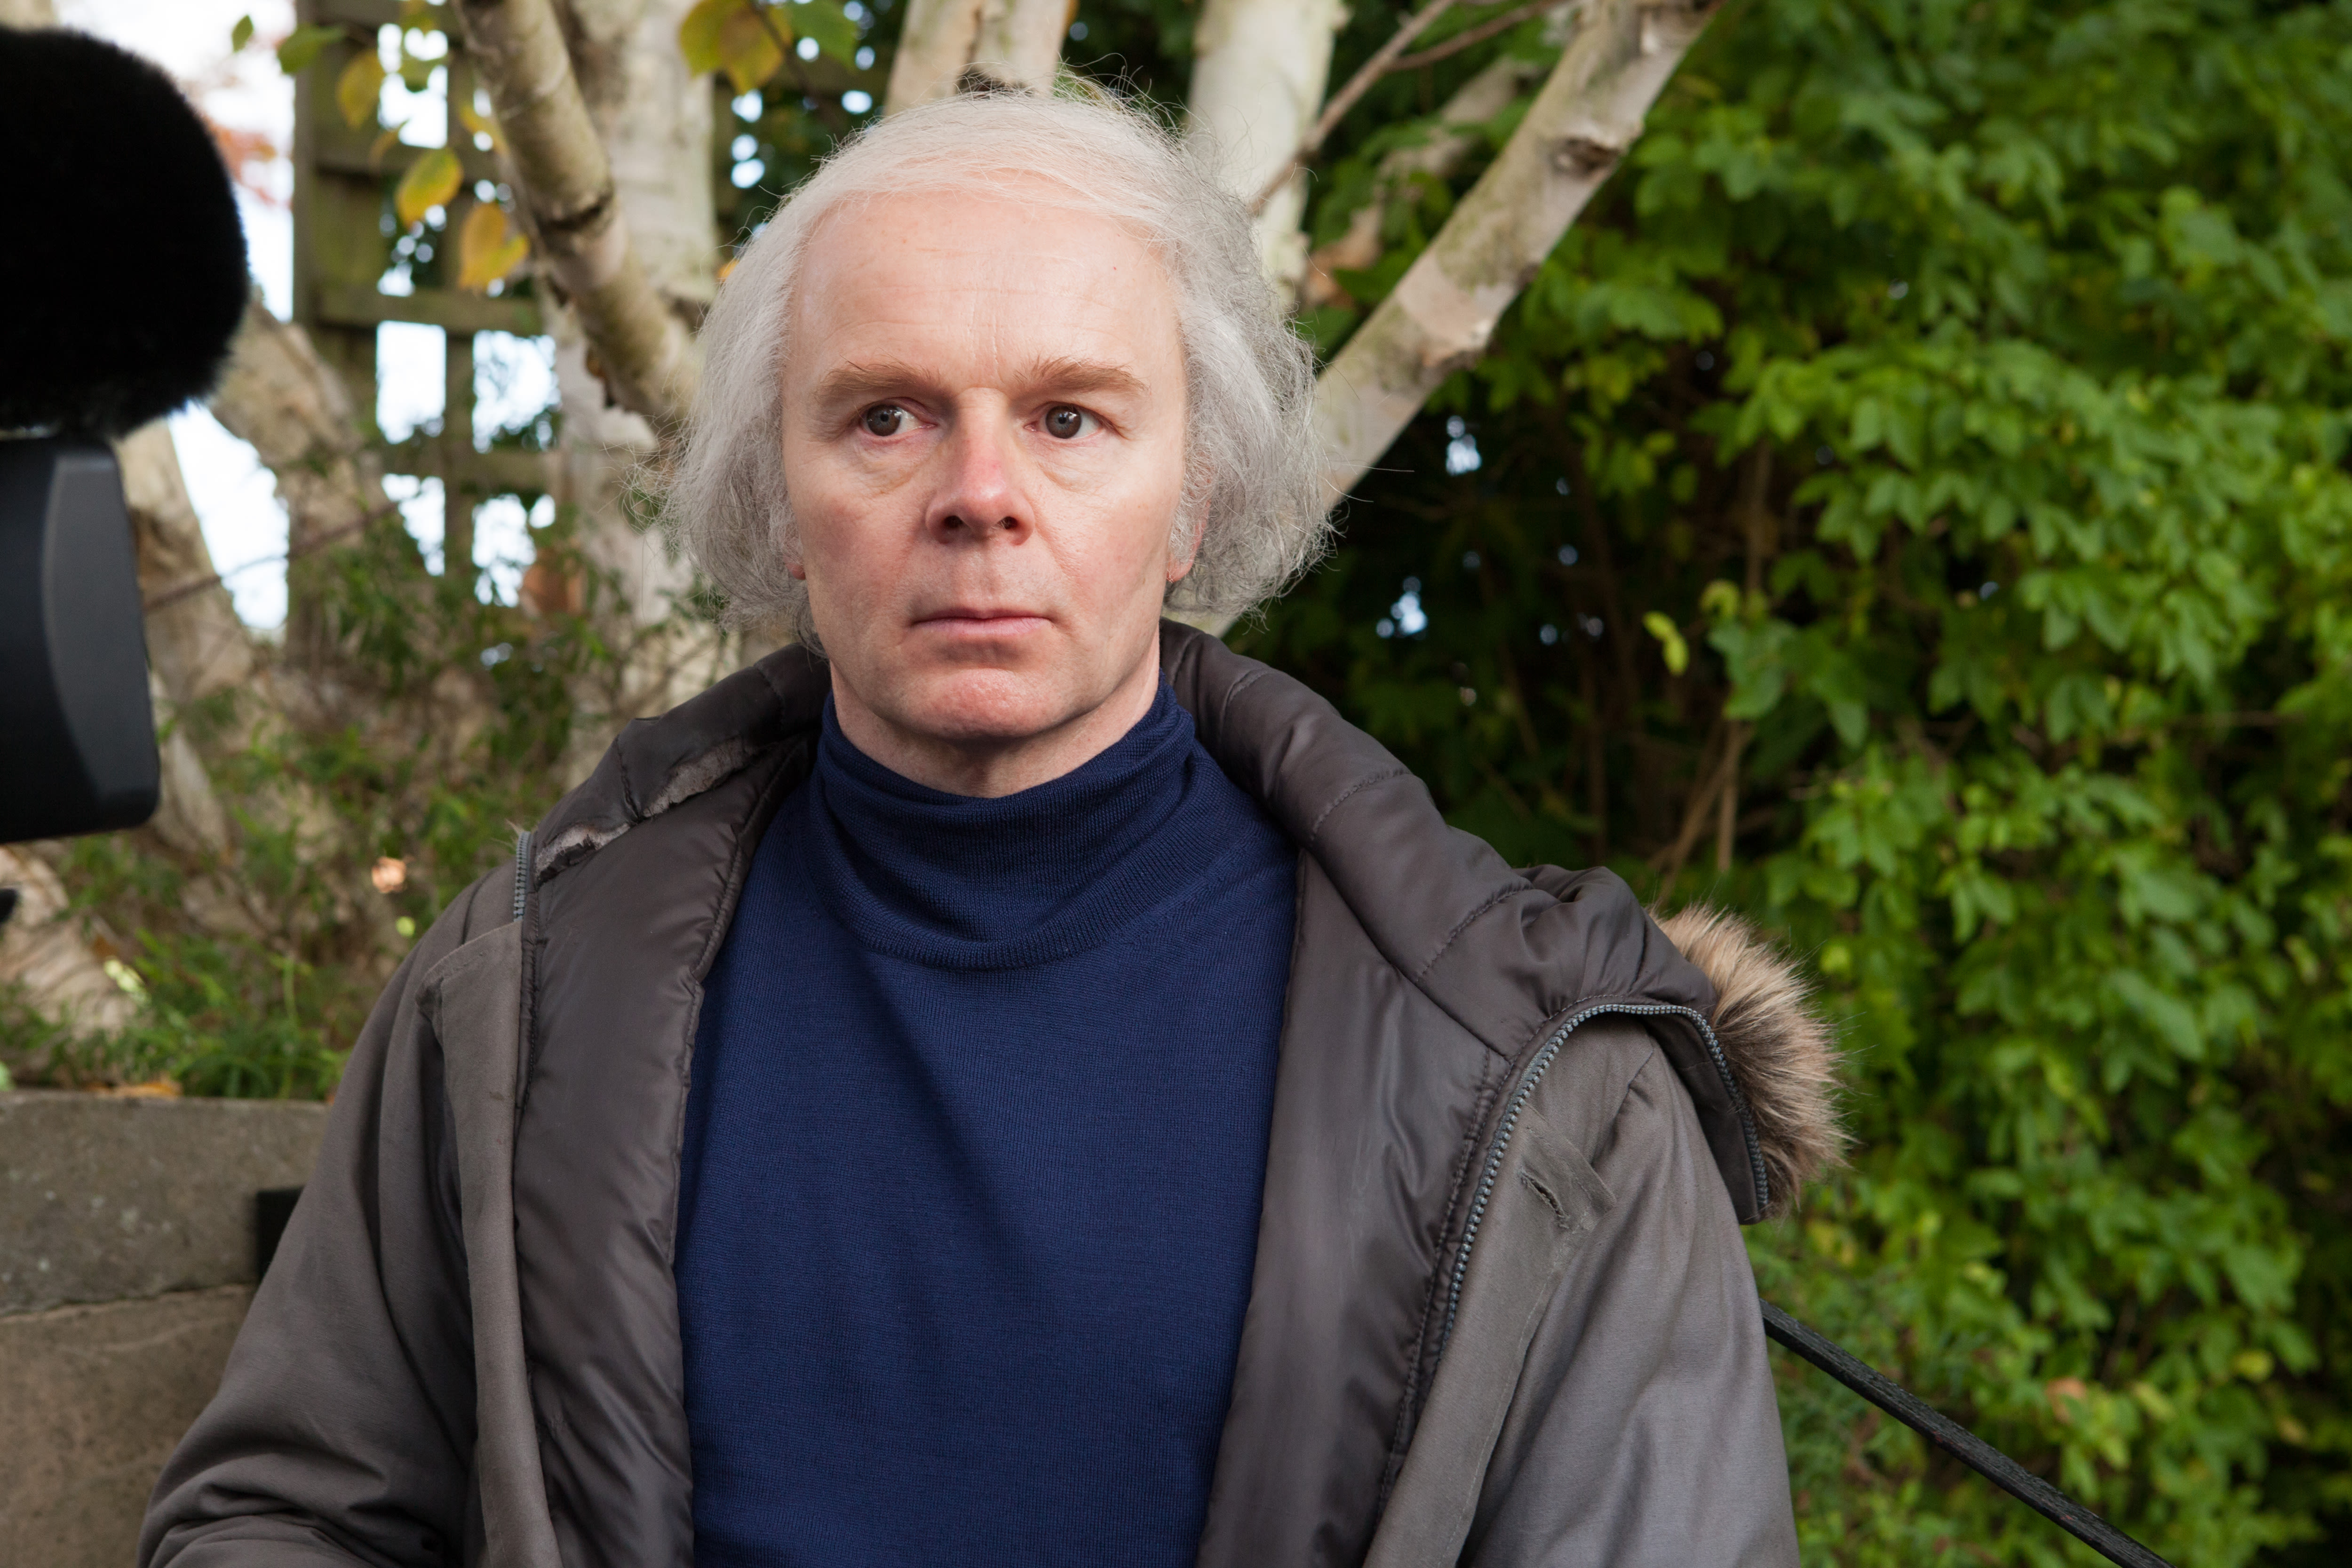 Jason Watkins says changing public's view of Christopher Jeffries was 'special'